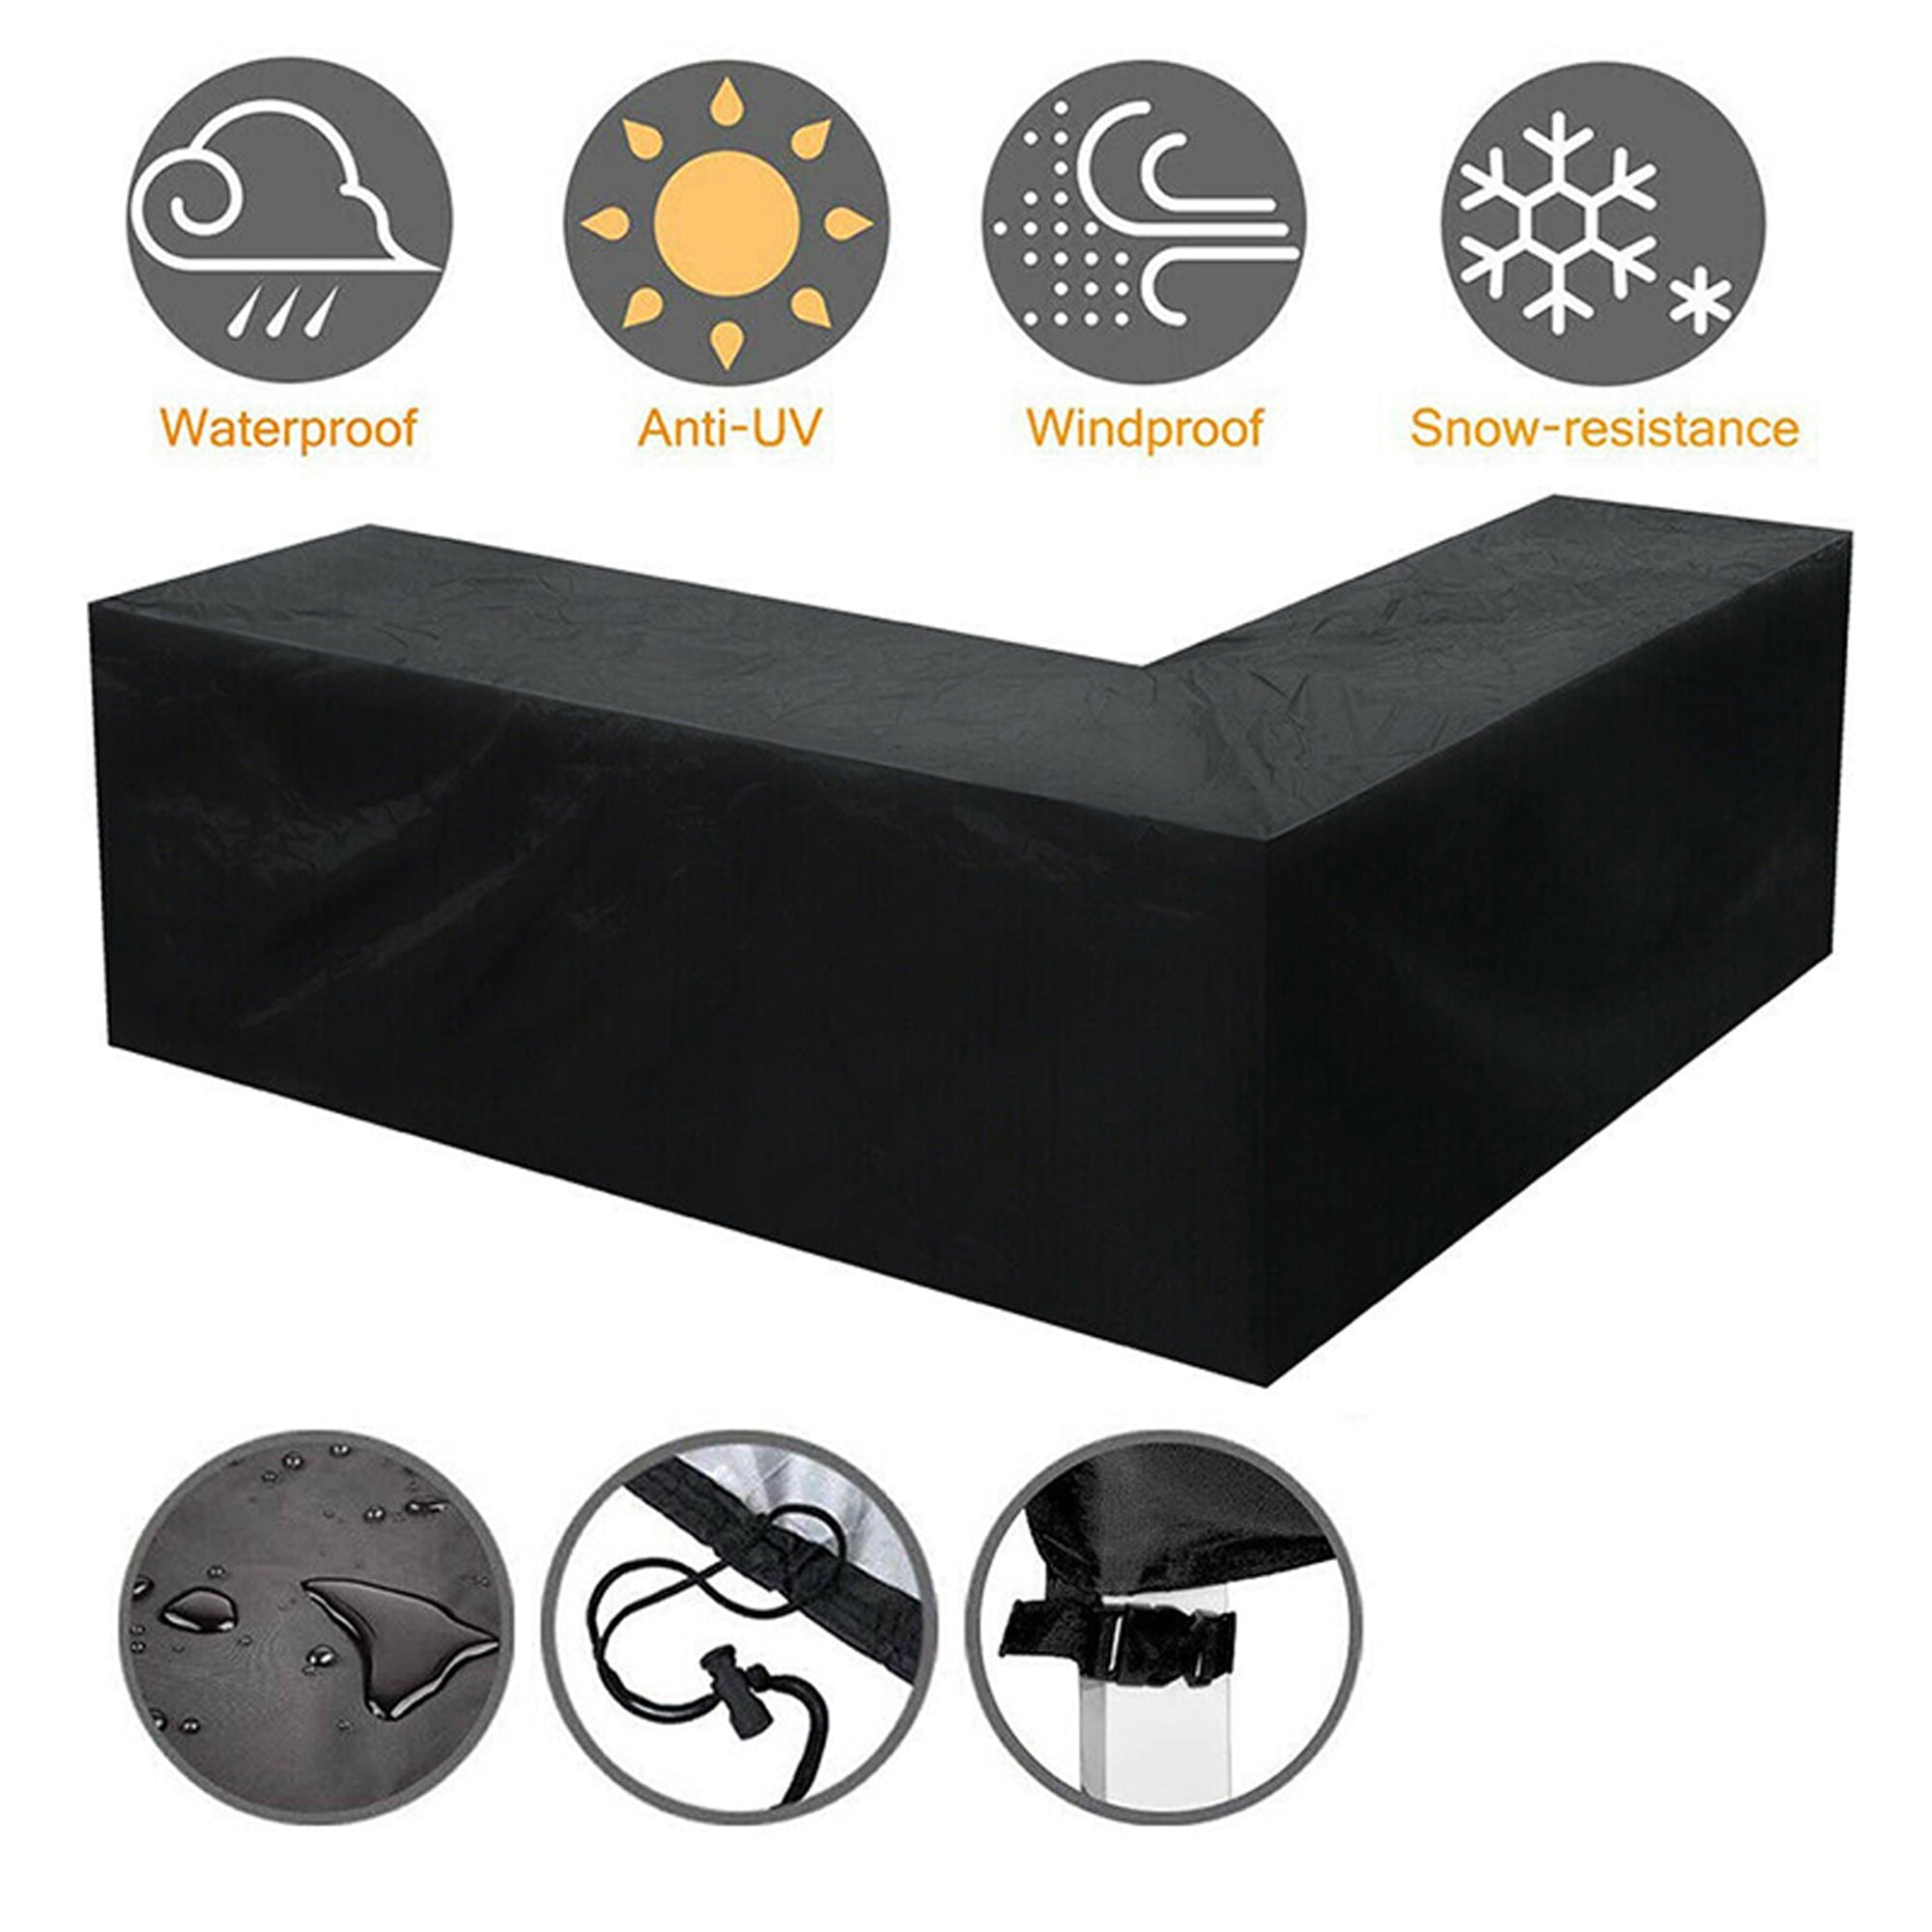 Ul Li This Garden Furniture Cover Is, 2×4 Outdoor Furniture